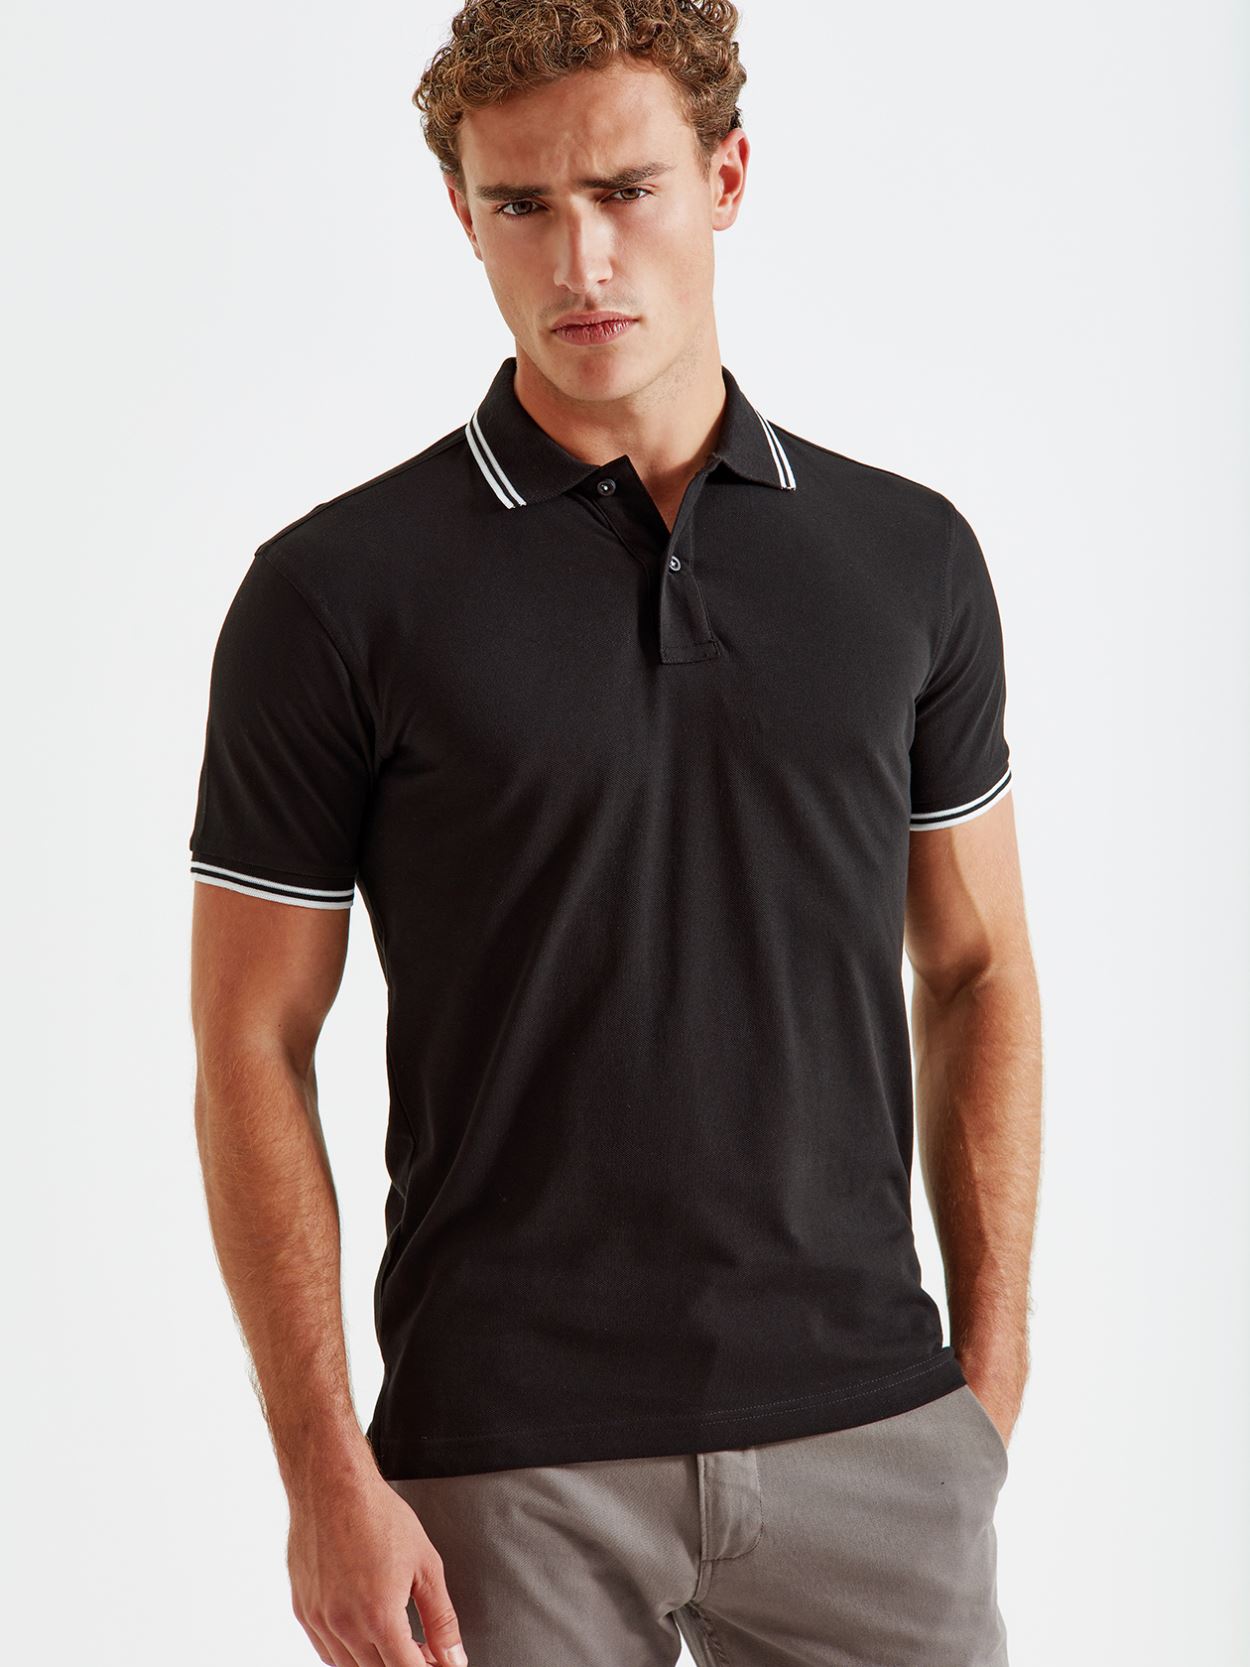 AQ011 Mens Classic Fit Tipped Polo Image 1